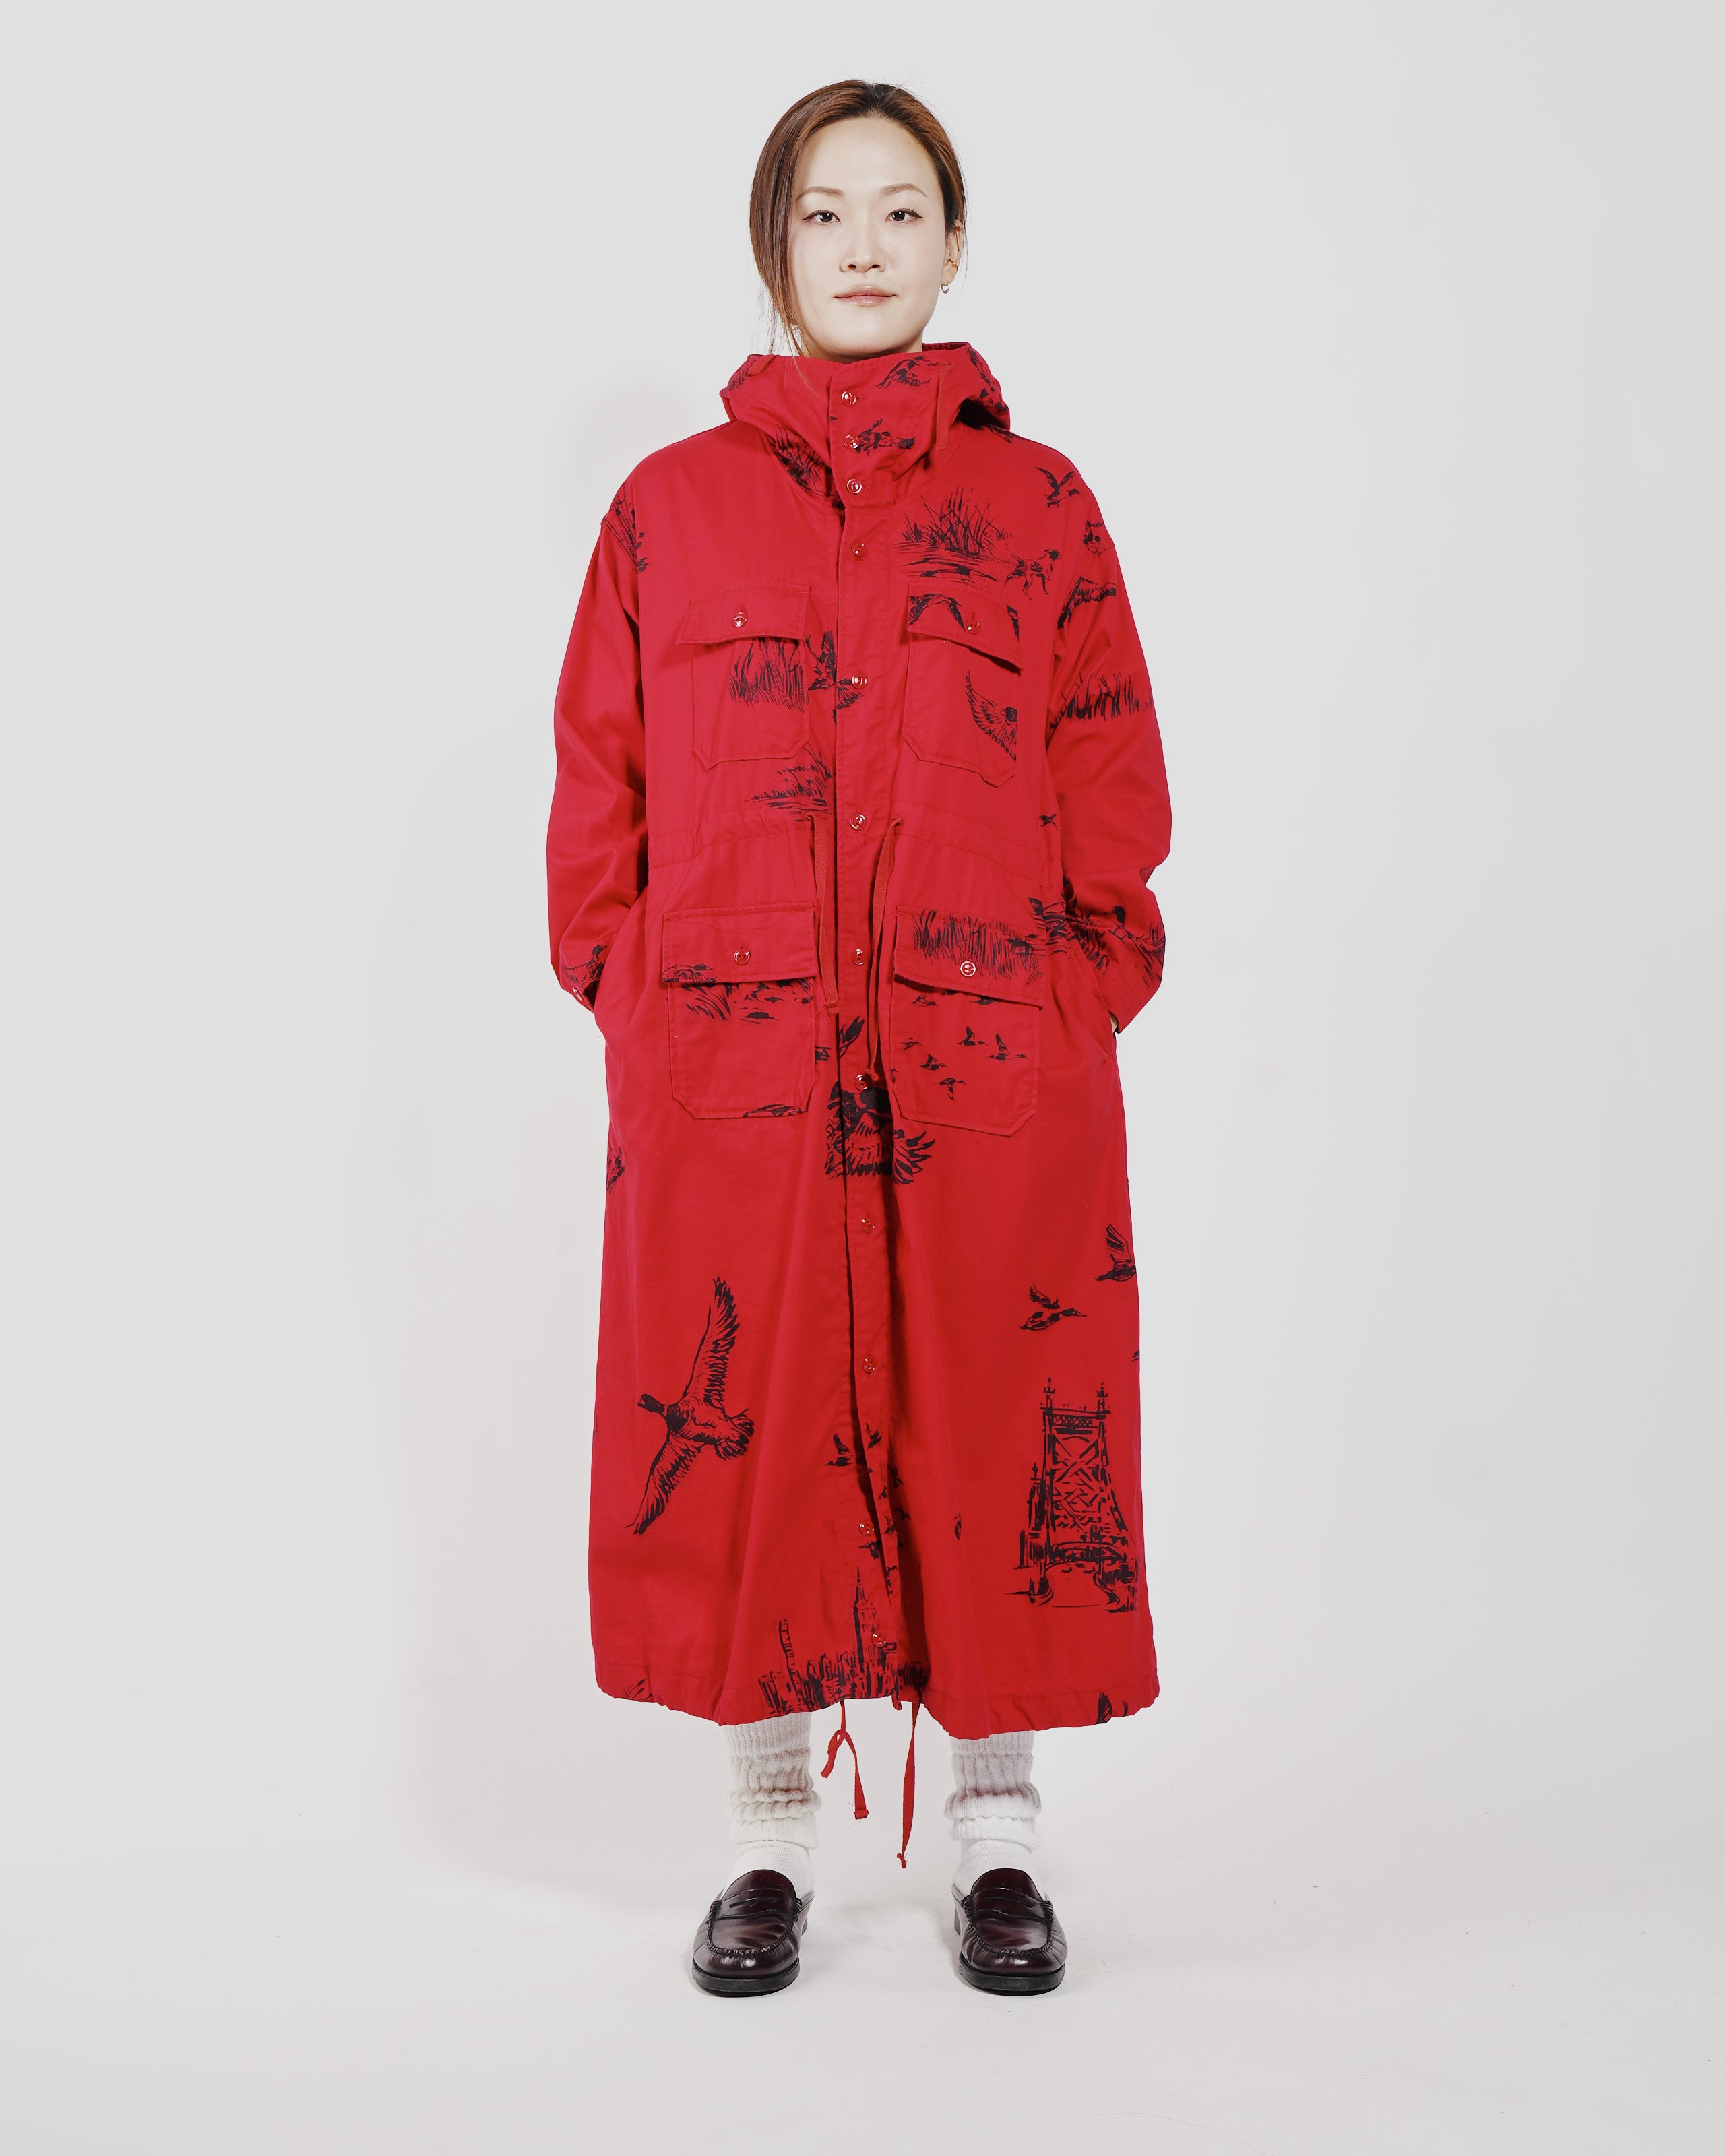 Cagoule Dress - Red Hunting Print French Twill